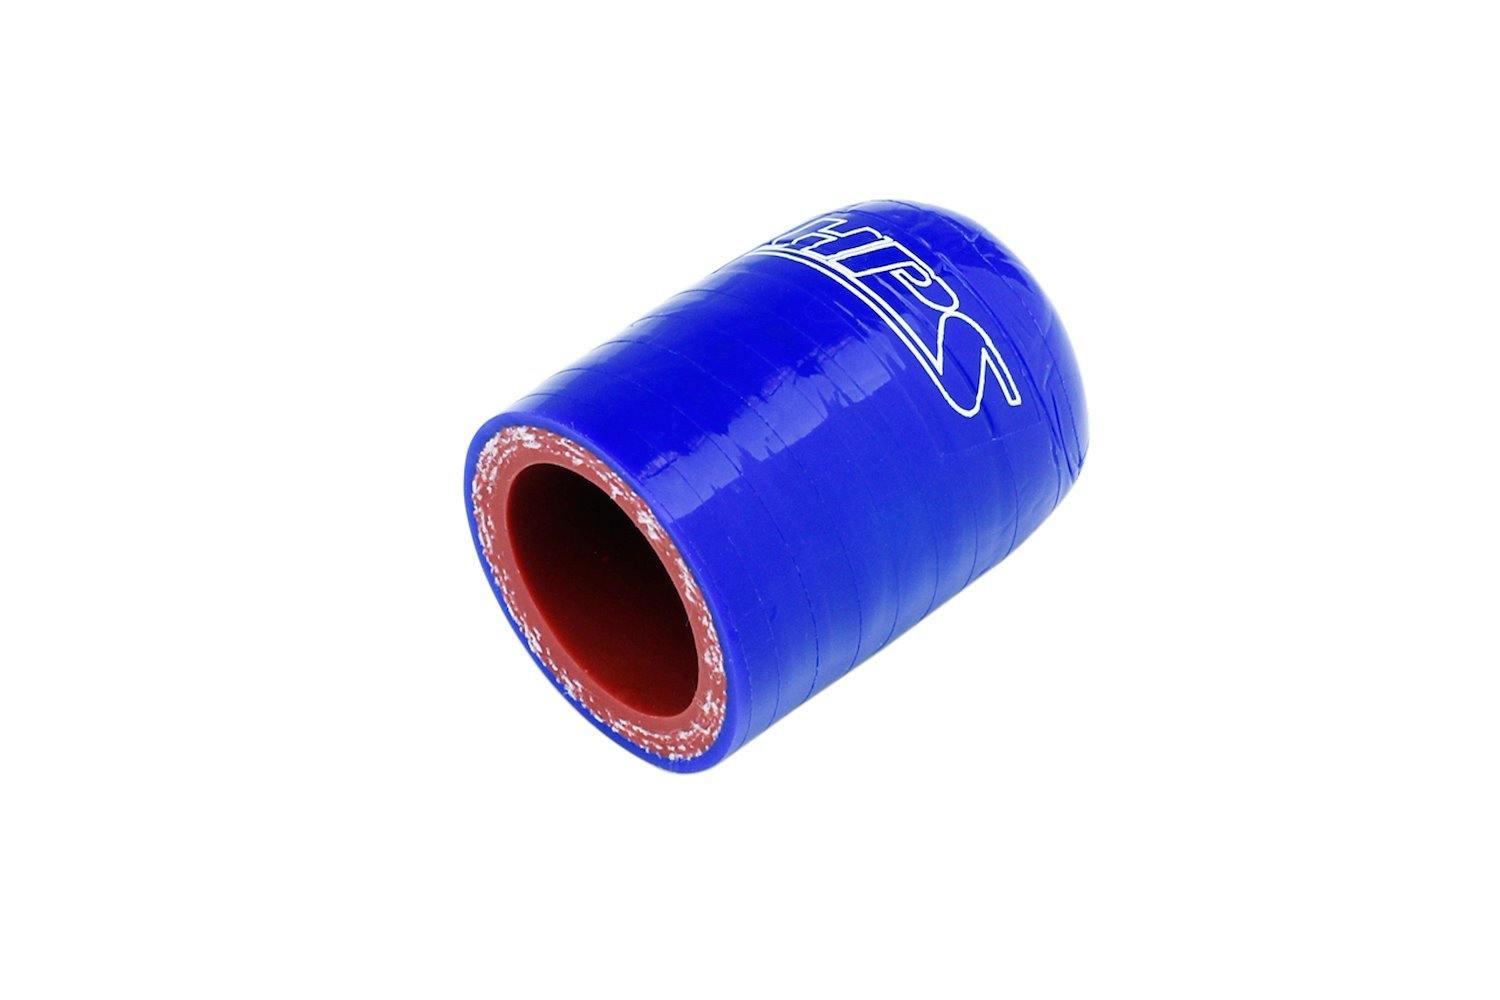 RSCC-075-BLUE Coolant Bypass Cap, 3-Ply Reinforced High-Temp. Silicone Bypass Cap, 3/4 in. ID, Blue